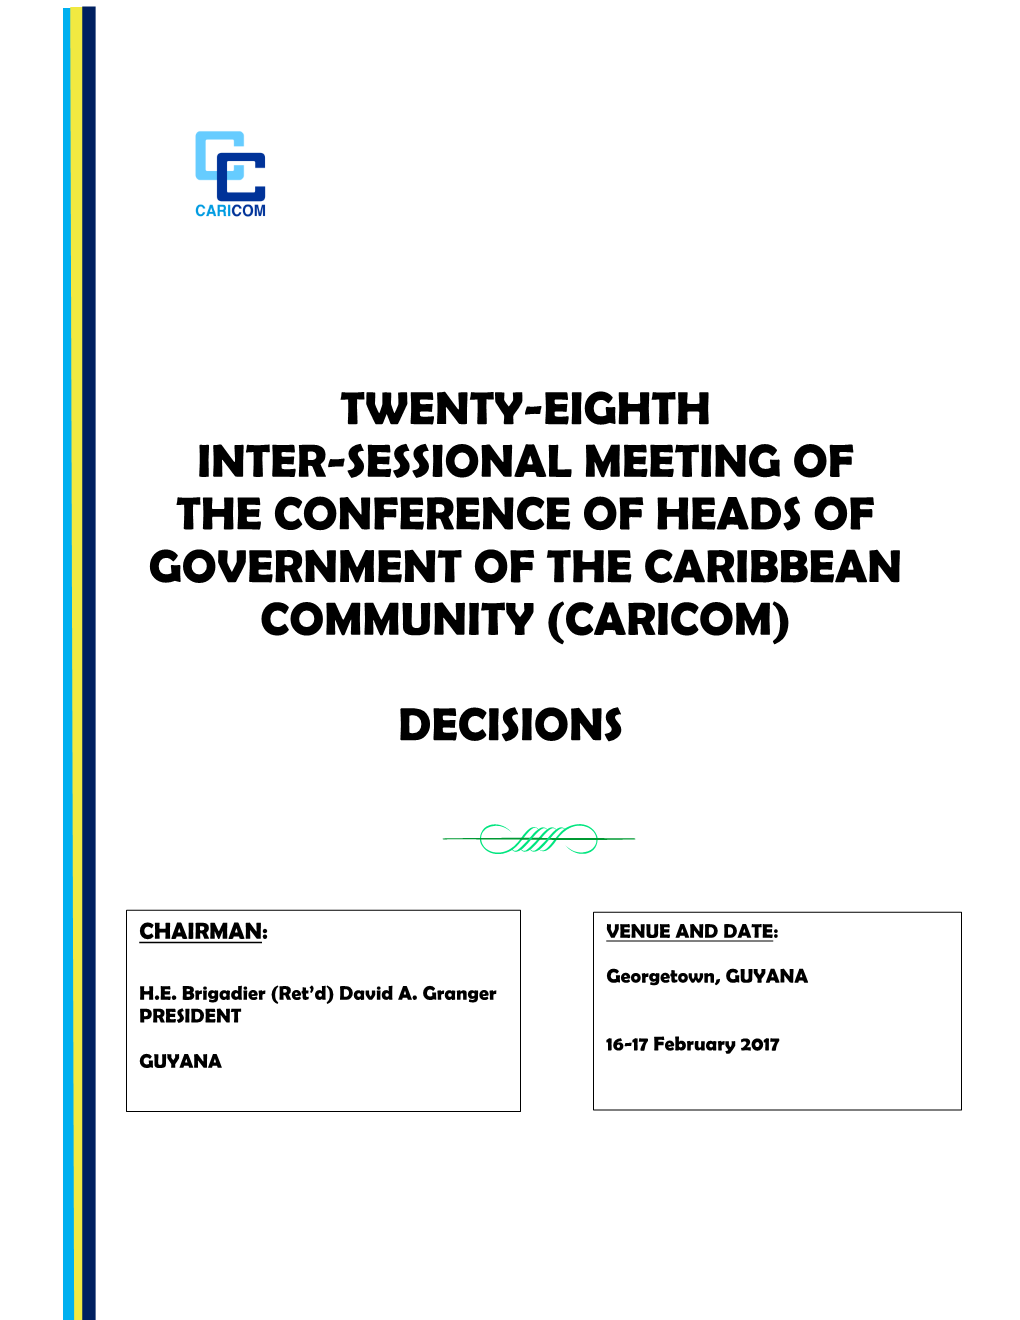 Twenty-Eighth Inter-Sessional Meeting of the Conference of Heads of Government of the Caribbean Community (Caricom)